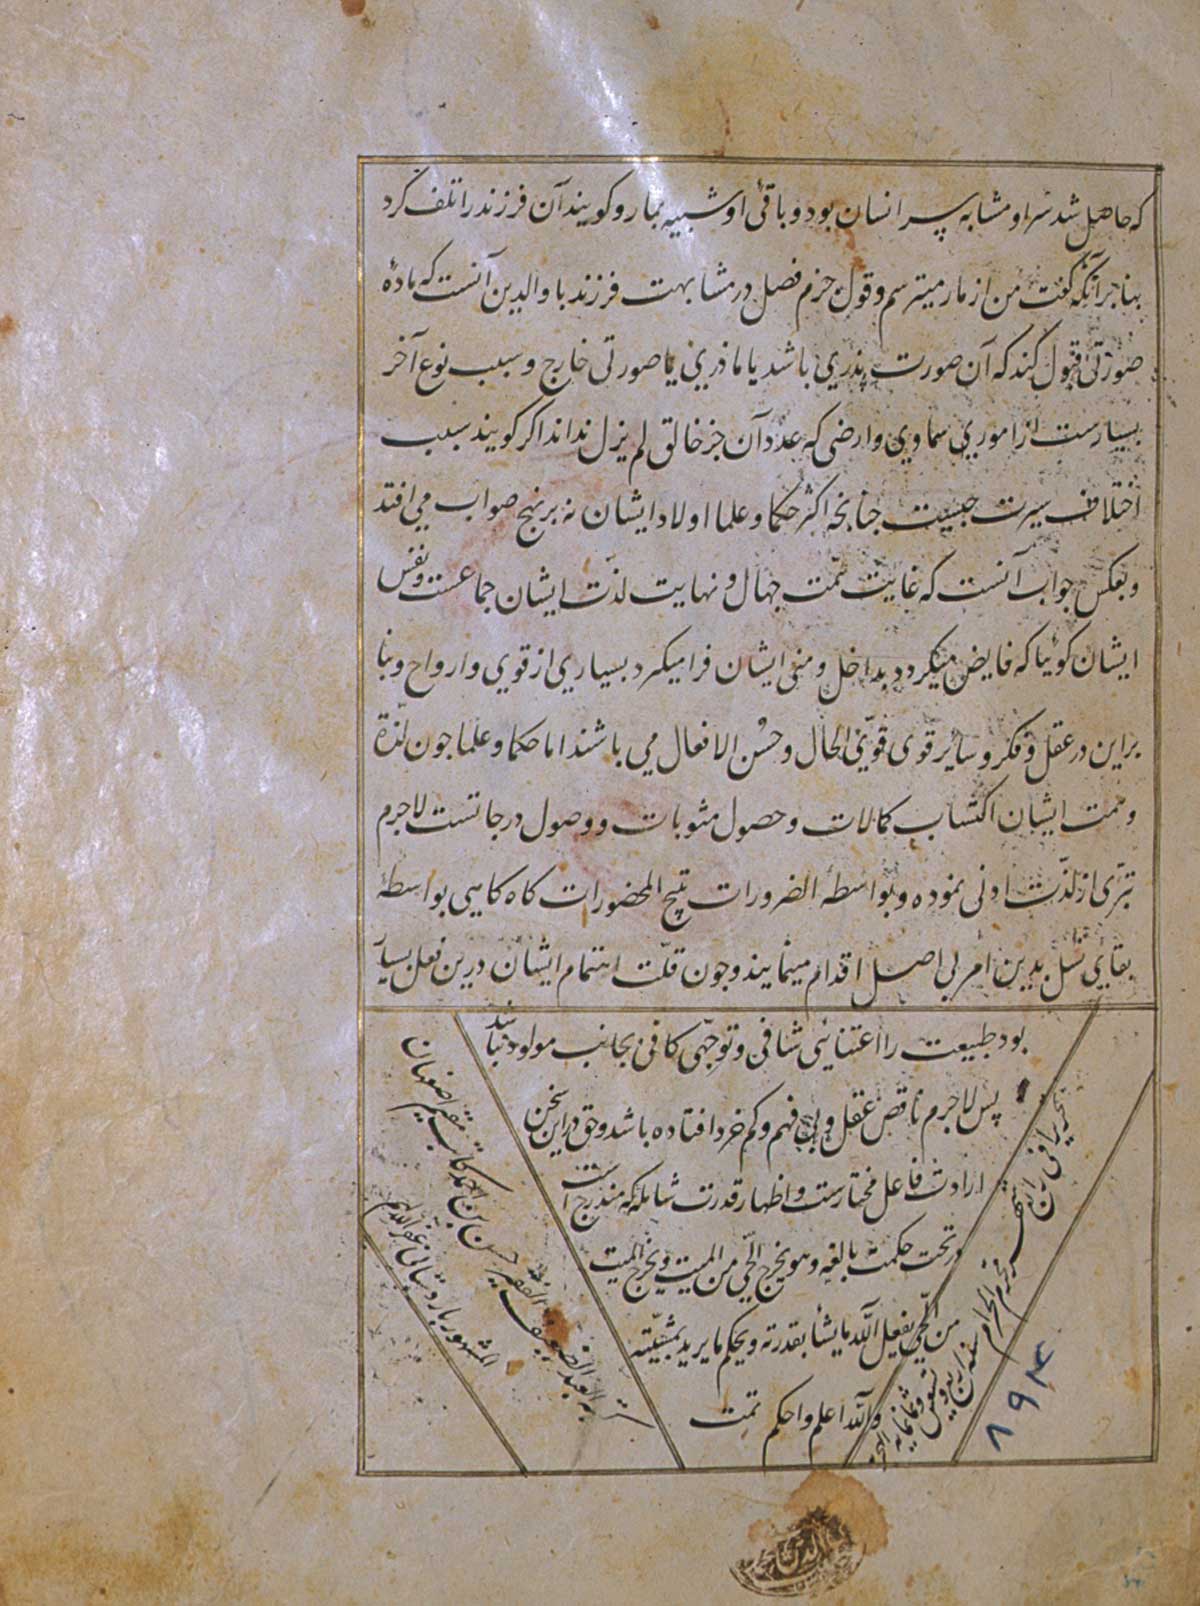 Folio 39a of Mansur ibn Ilyas' Tashrih-i badan-i insan, featuring the colophon, written diagonally at the bottom of the page. On the righthand side it states that the copy was completed on 4 Muharram 894 (= 8 December 1488), with the year written in both words and numerals. On the left side it says that it was copied by Ḥasan ibn Aḥmad.